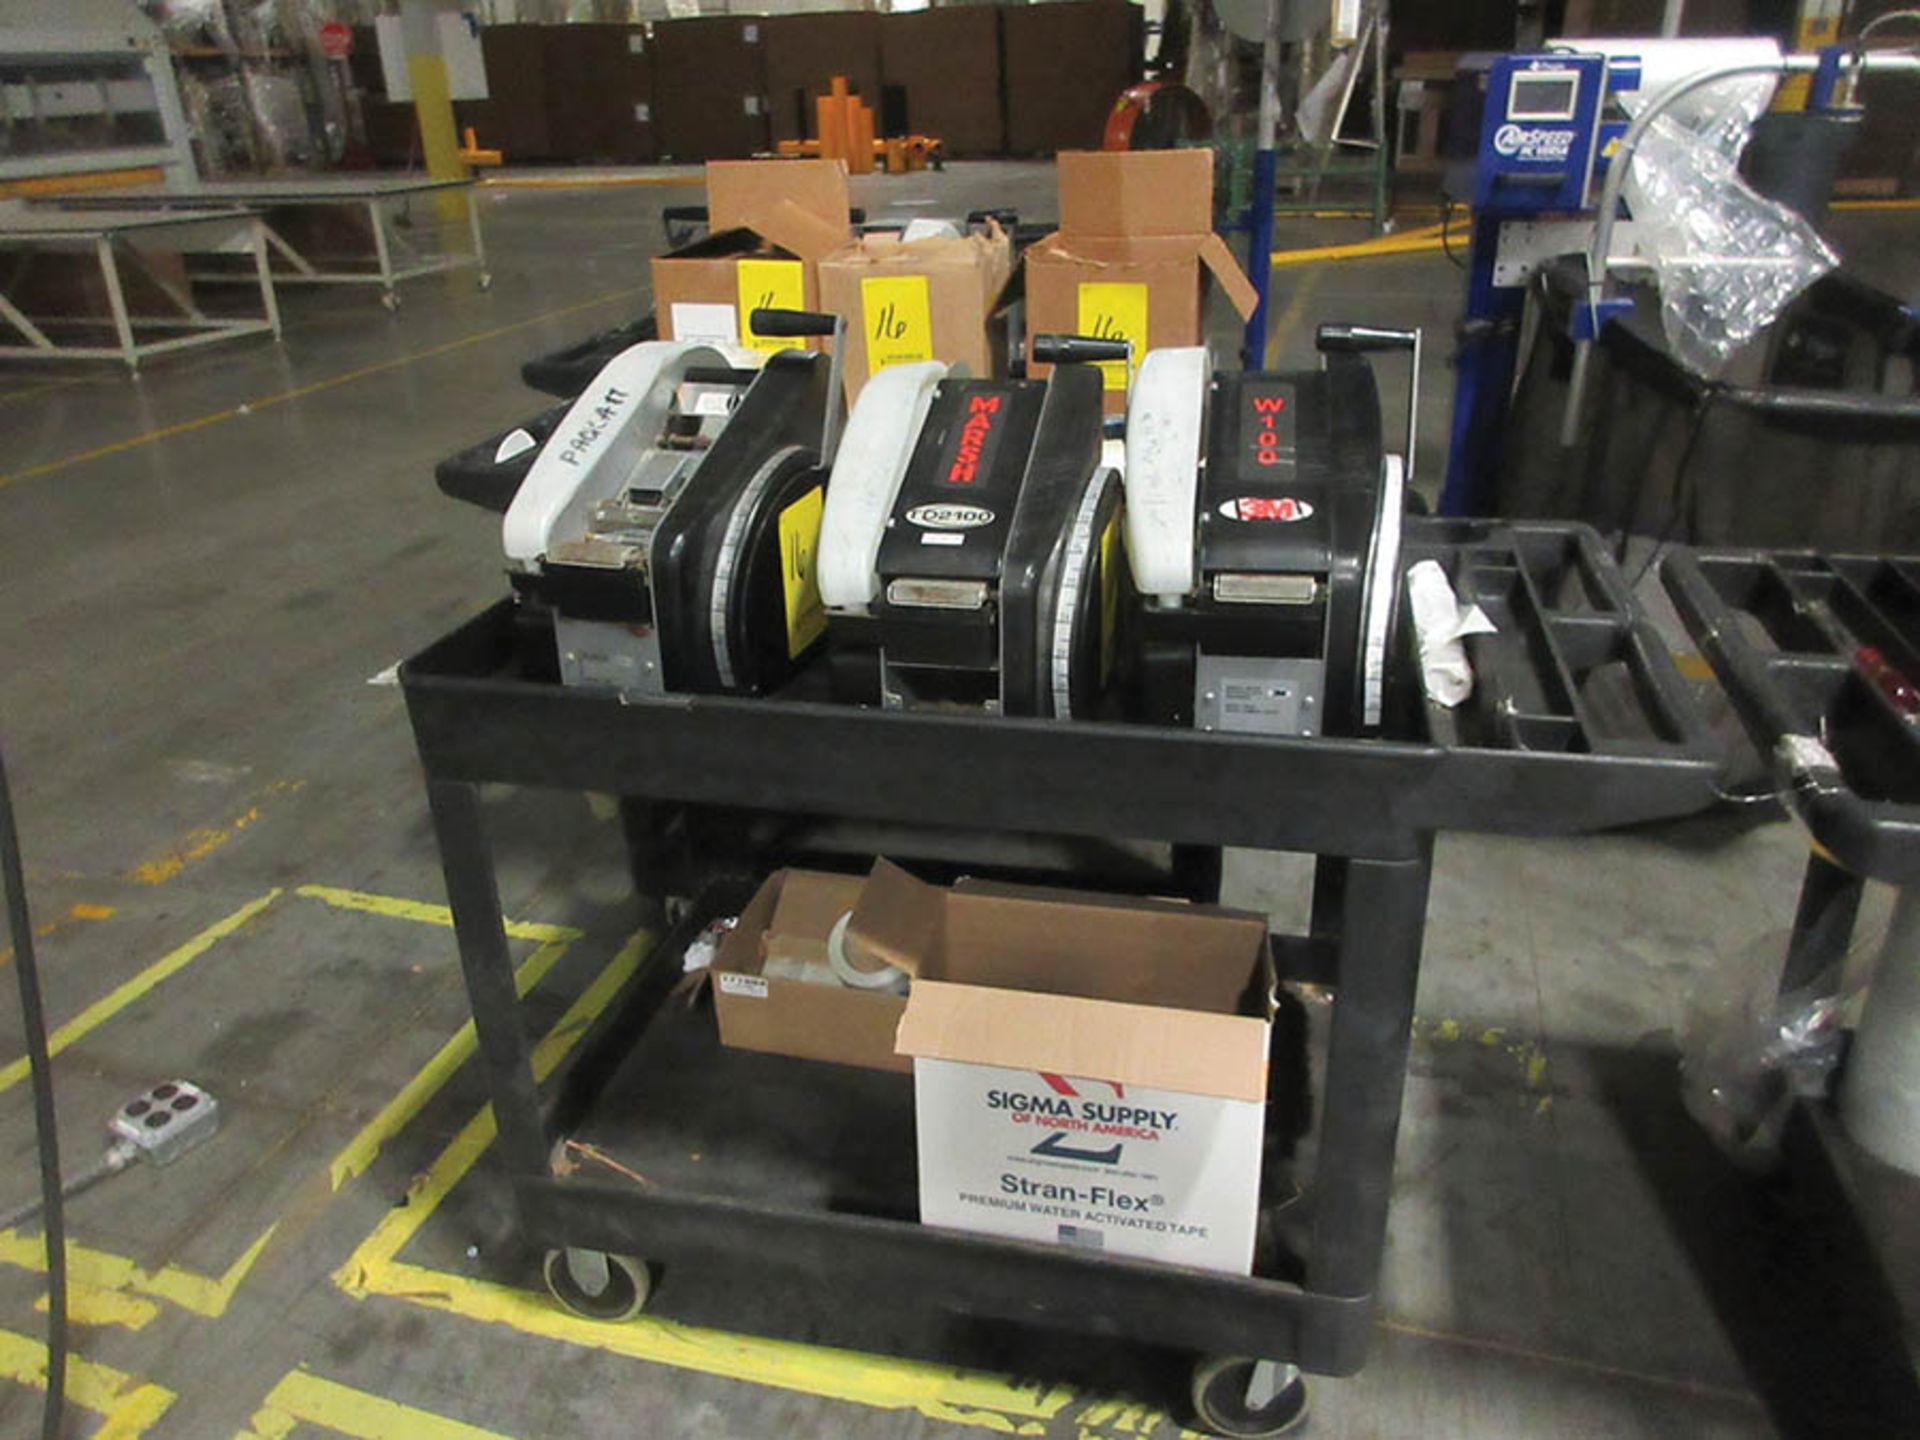 (12) MARSH TDH CARTON SEALERS AND HAND-HELD TAPE APPLICATORS, ASSORTED TAPE (5) UTILITY CARTS - Image 2 of 4